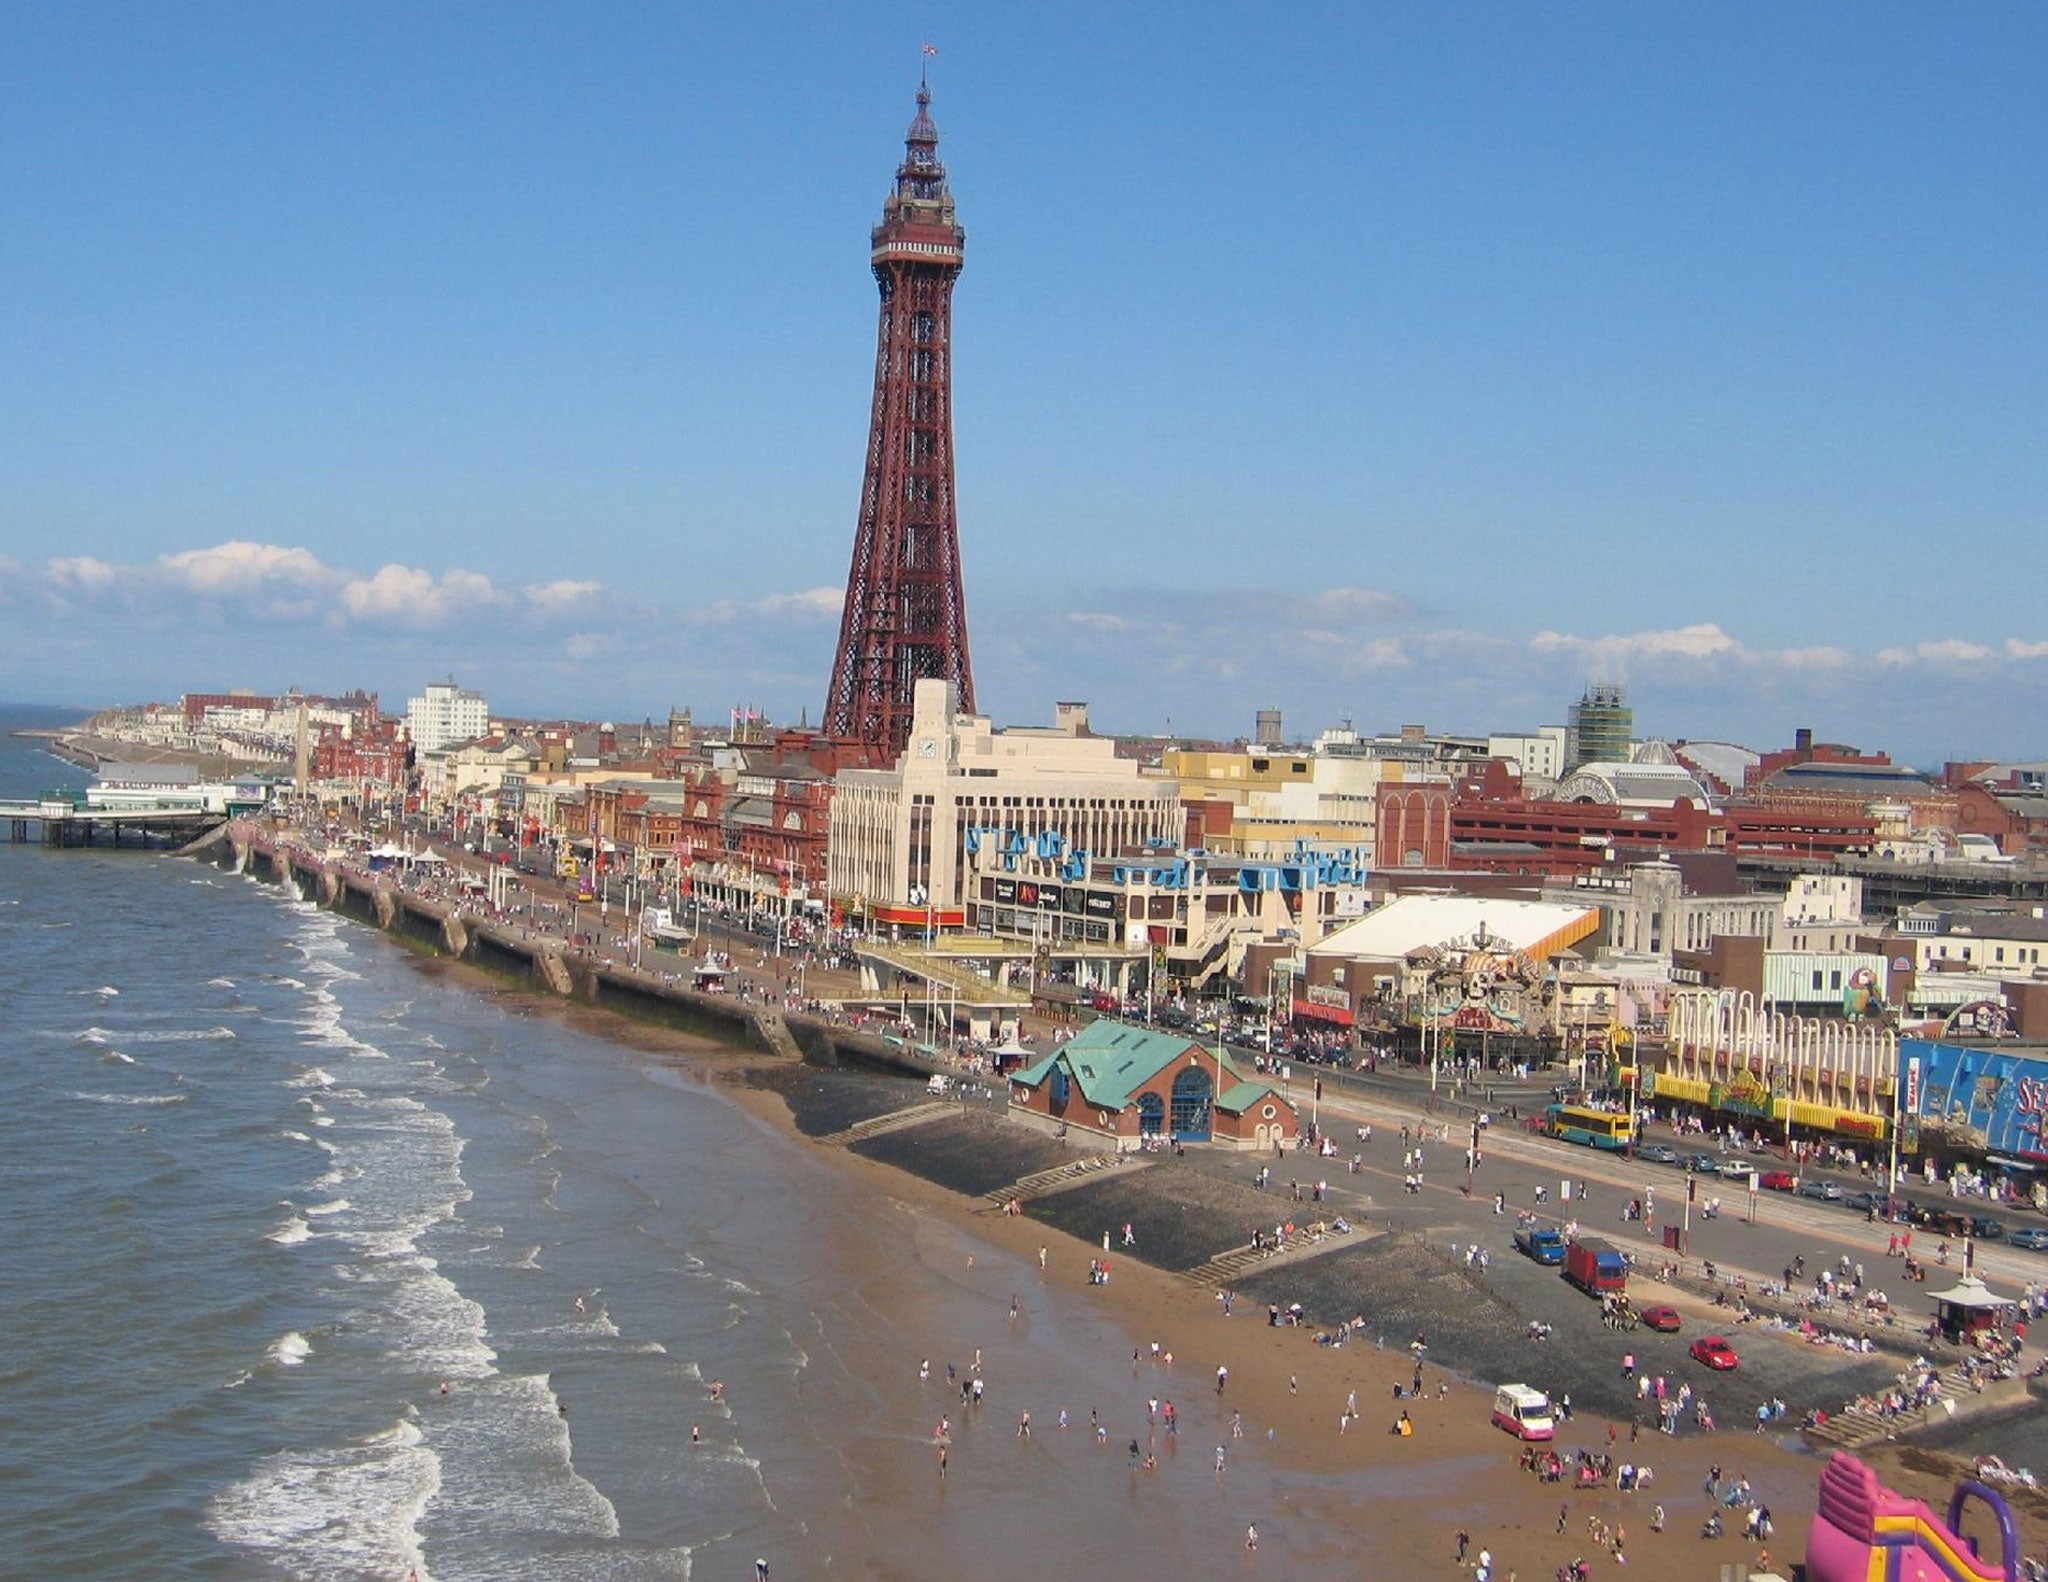 The report, entitled Turning the Tide, called for action to revive the fortunes of seaside towns like Blackpool in Lancashire